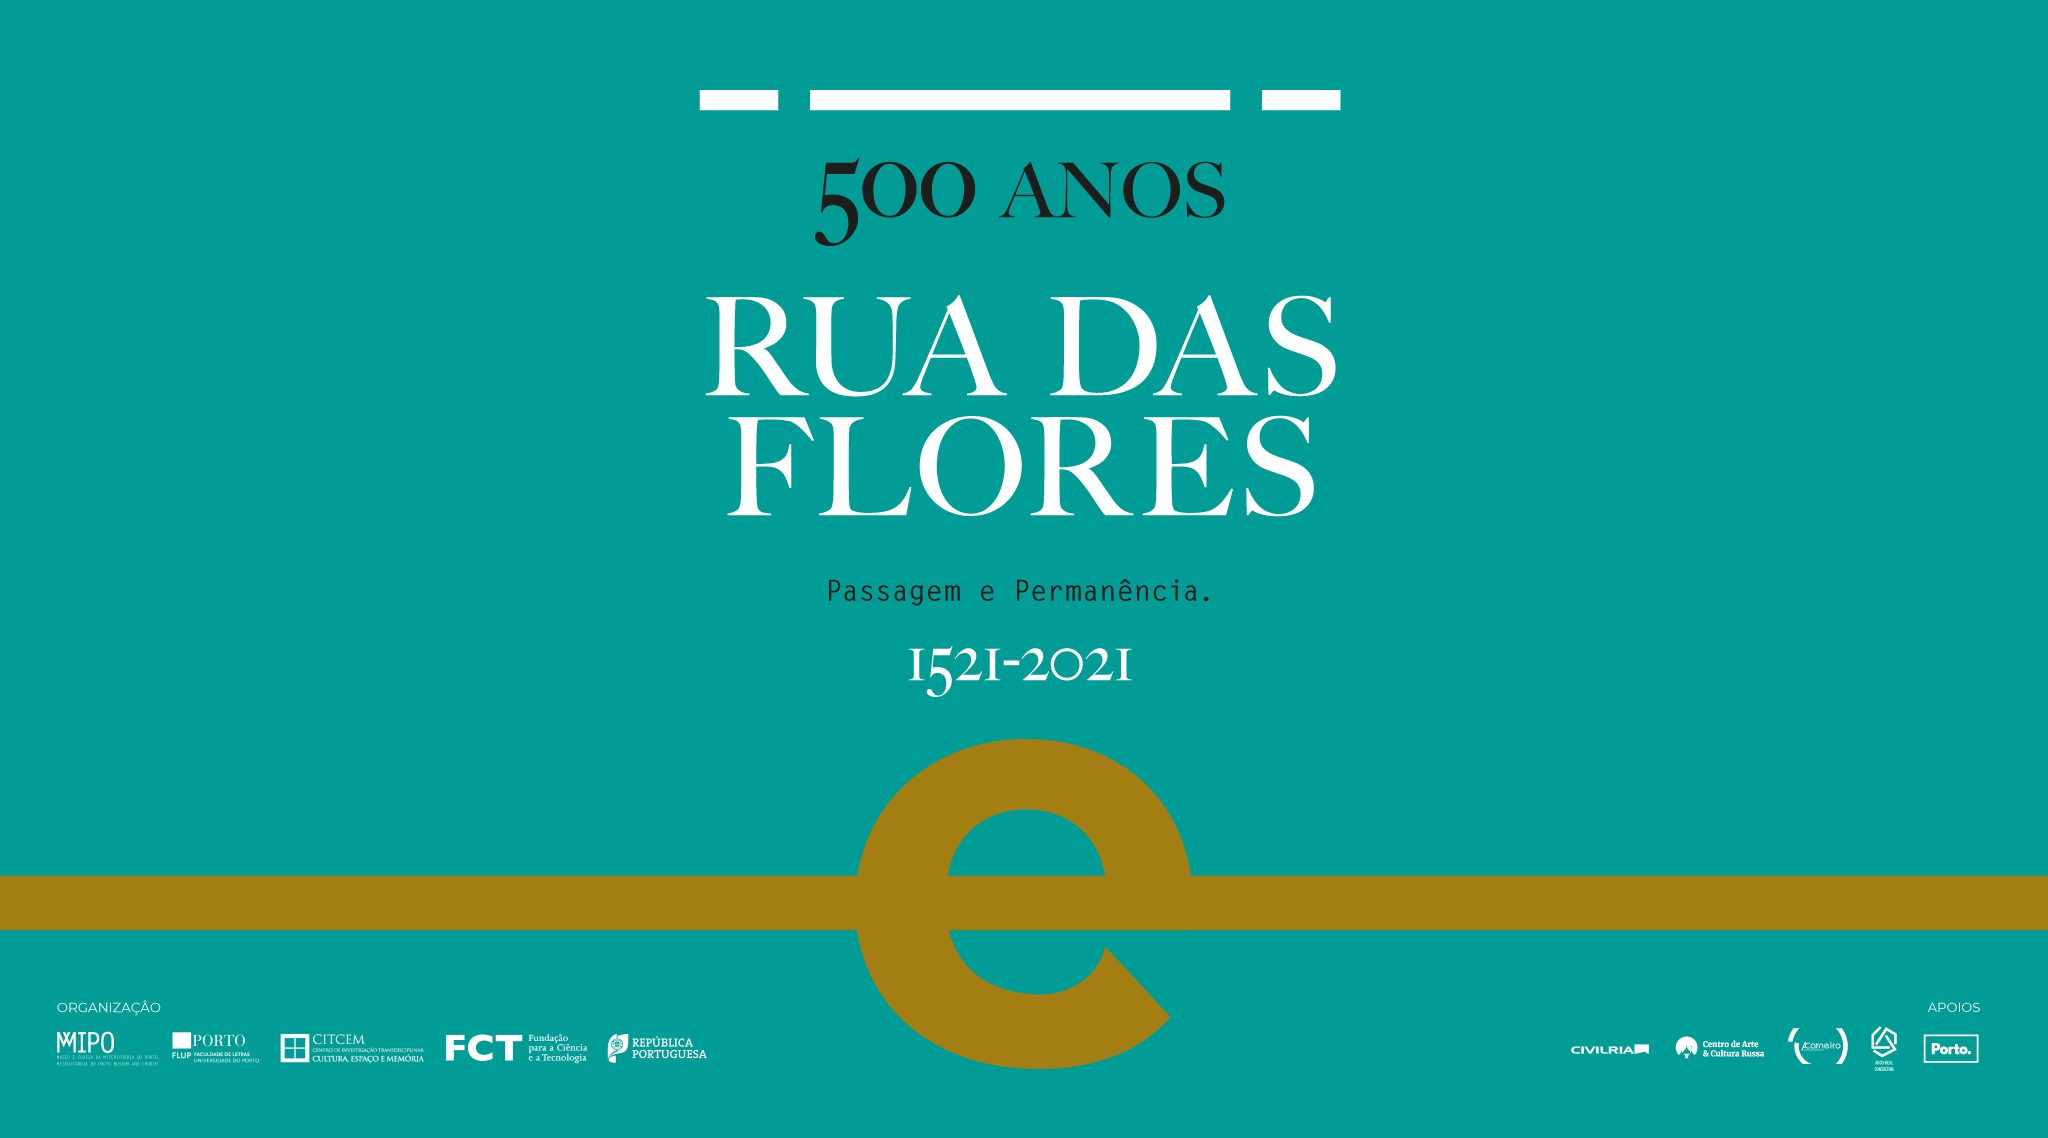 https://www.mmipo.pt/assets/misc/Not%C3%ADcias/2021/2021-11-05%20Exposi%C3%A7%C3%A3%20o500%20anos/evento_FB_Rflores500_B.png